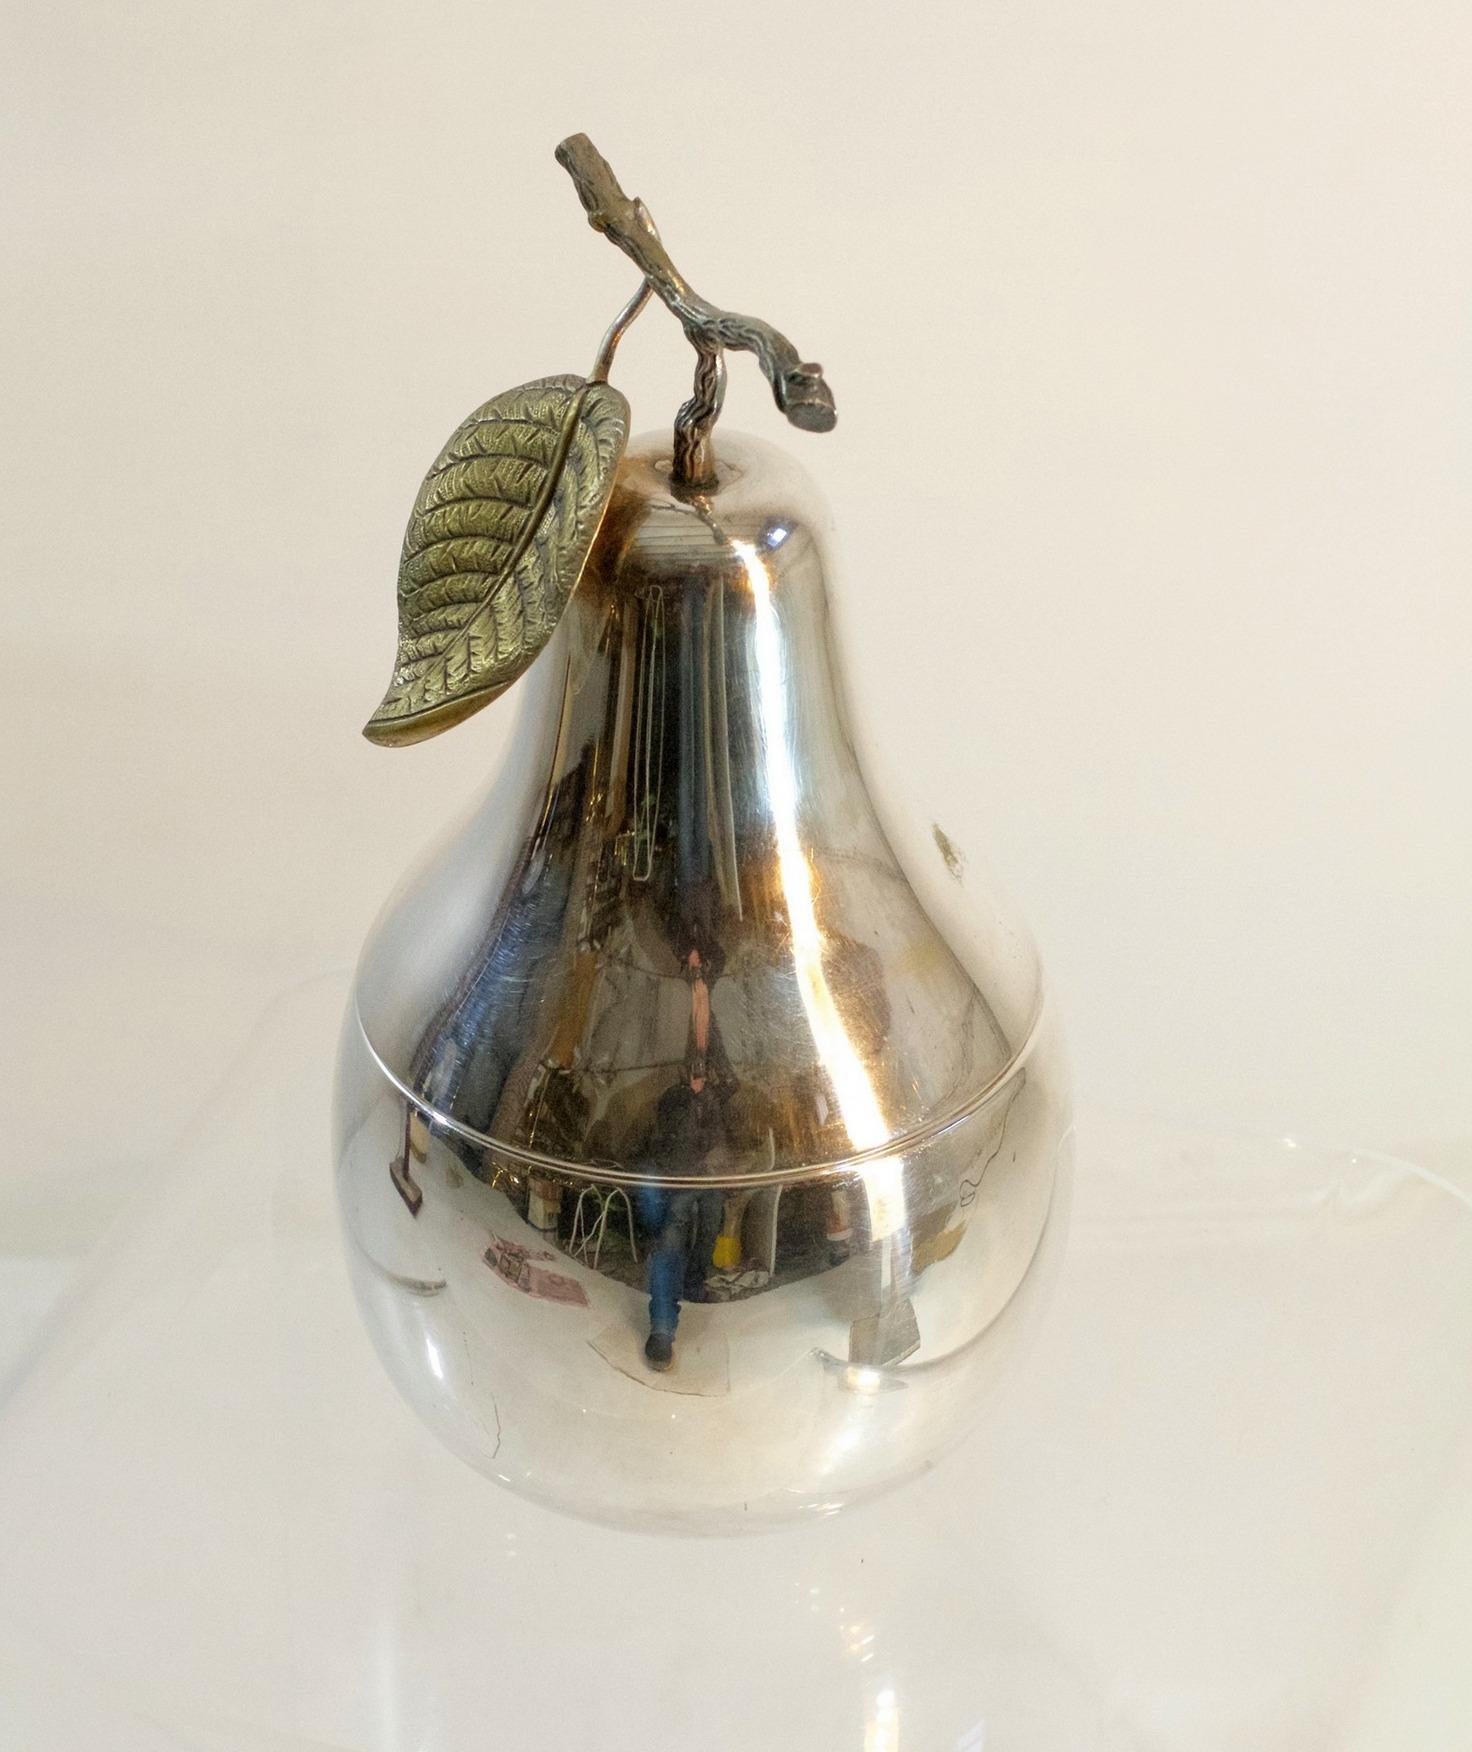 Large Ice bucket designed like a pear with metal inside by Italian manufacturer Teghini Firenze in silver plate and in great condition. Without dings or damages.